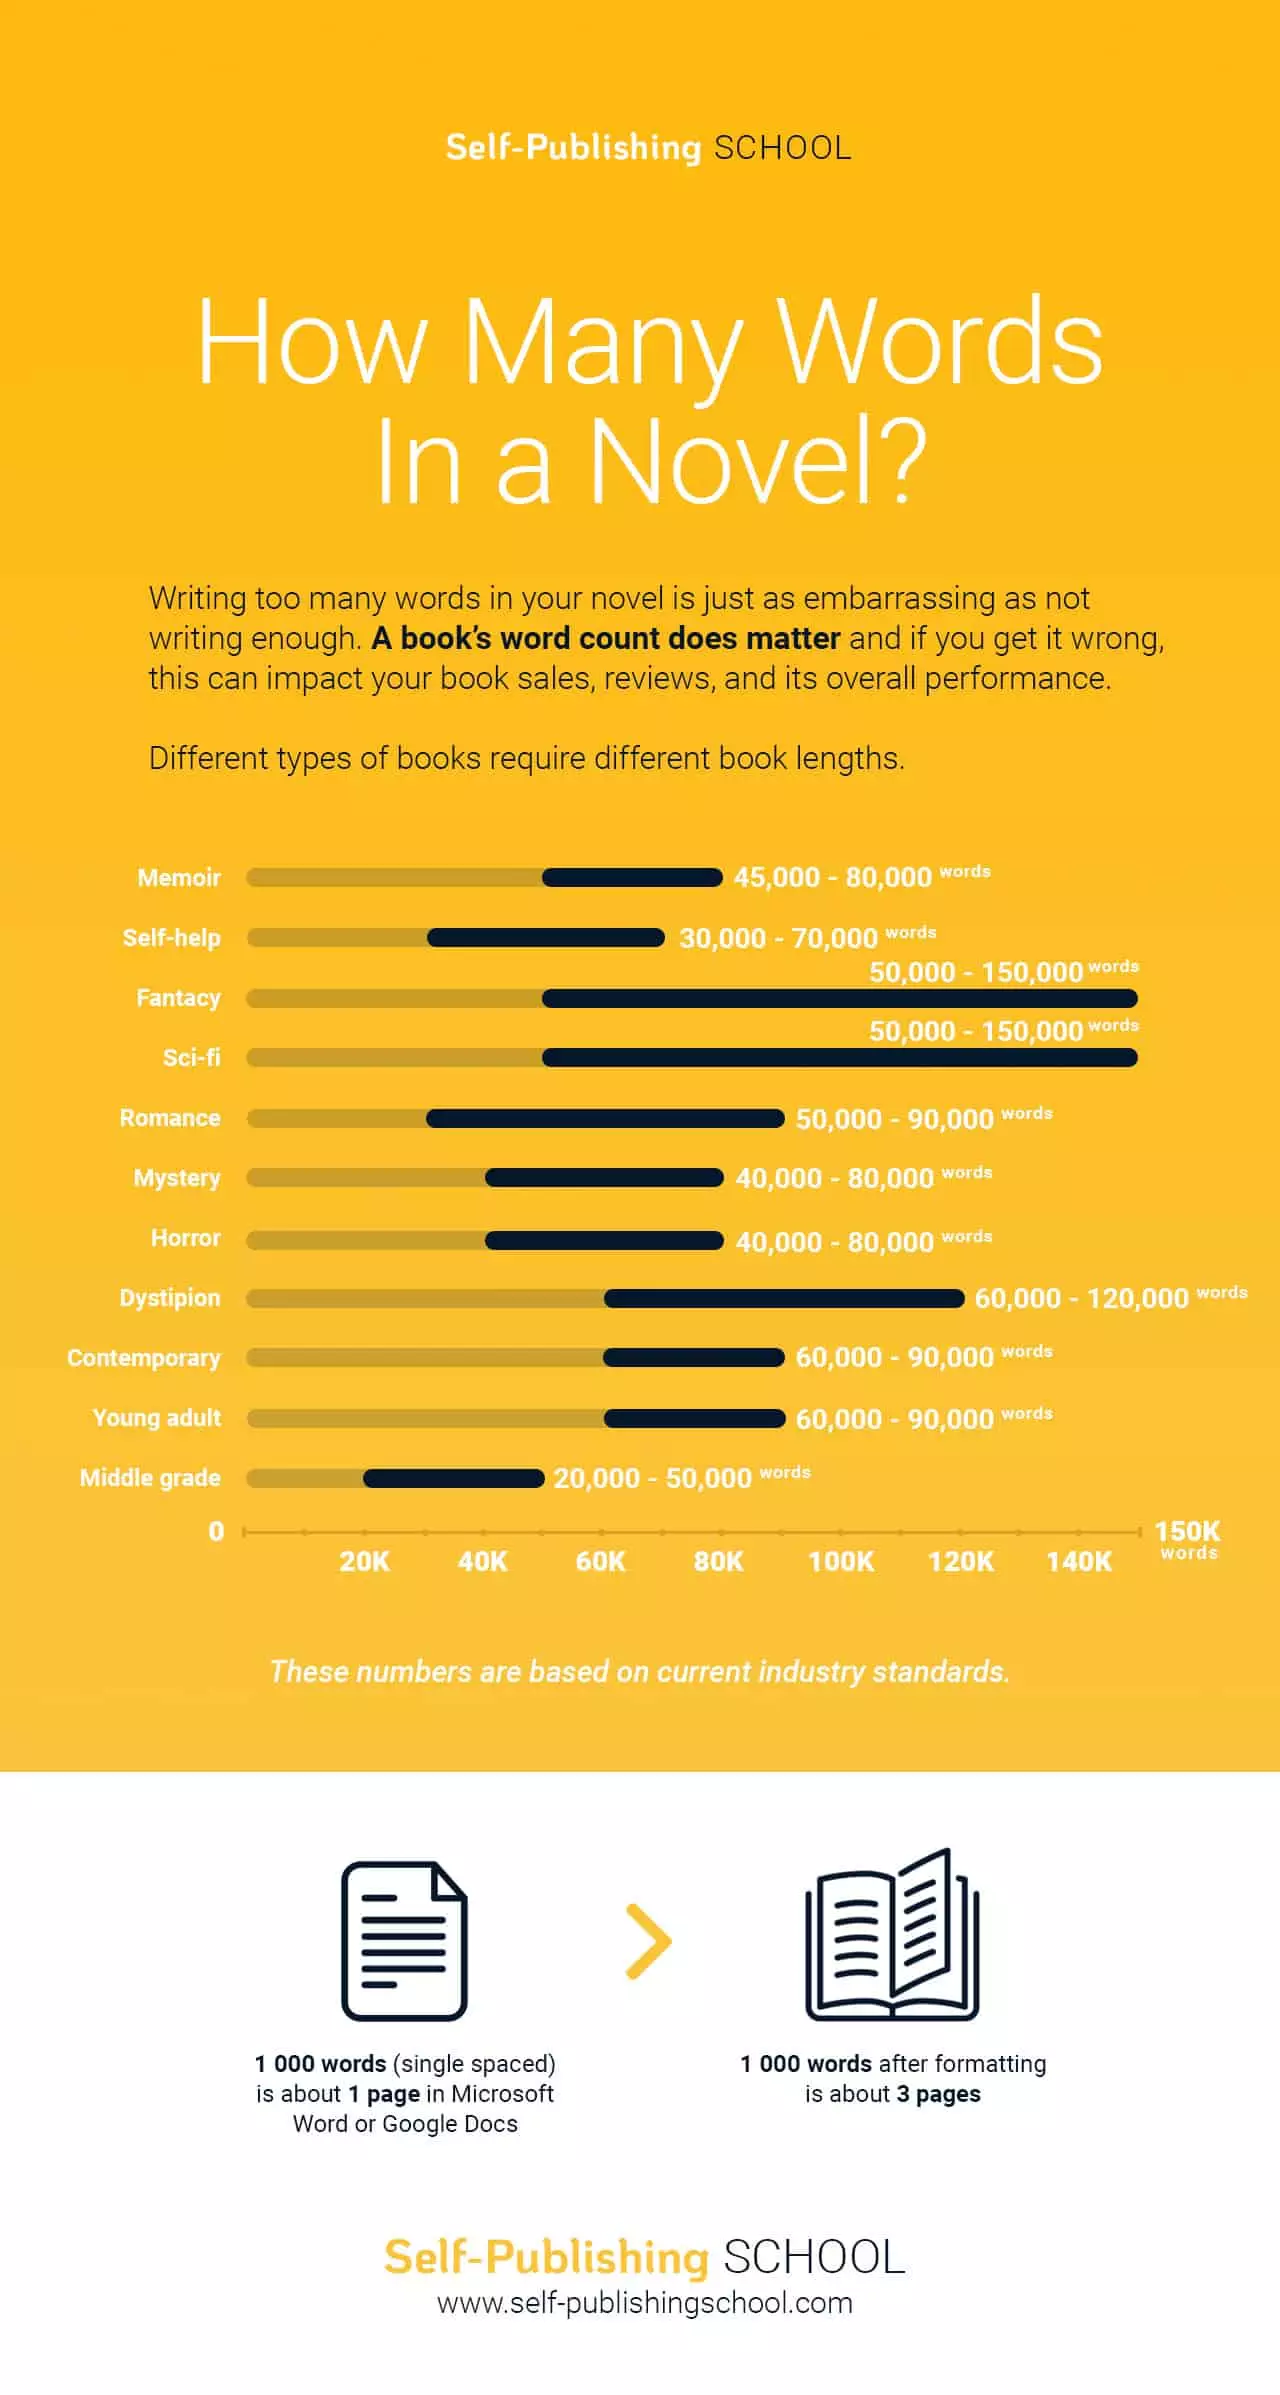 How Many Words in a Novel? Word Count Per Genre [Examples]